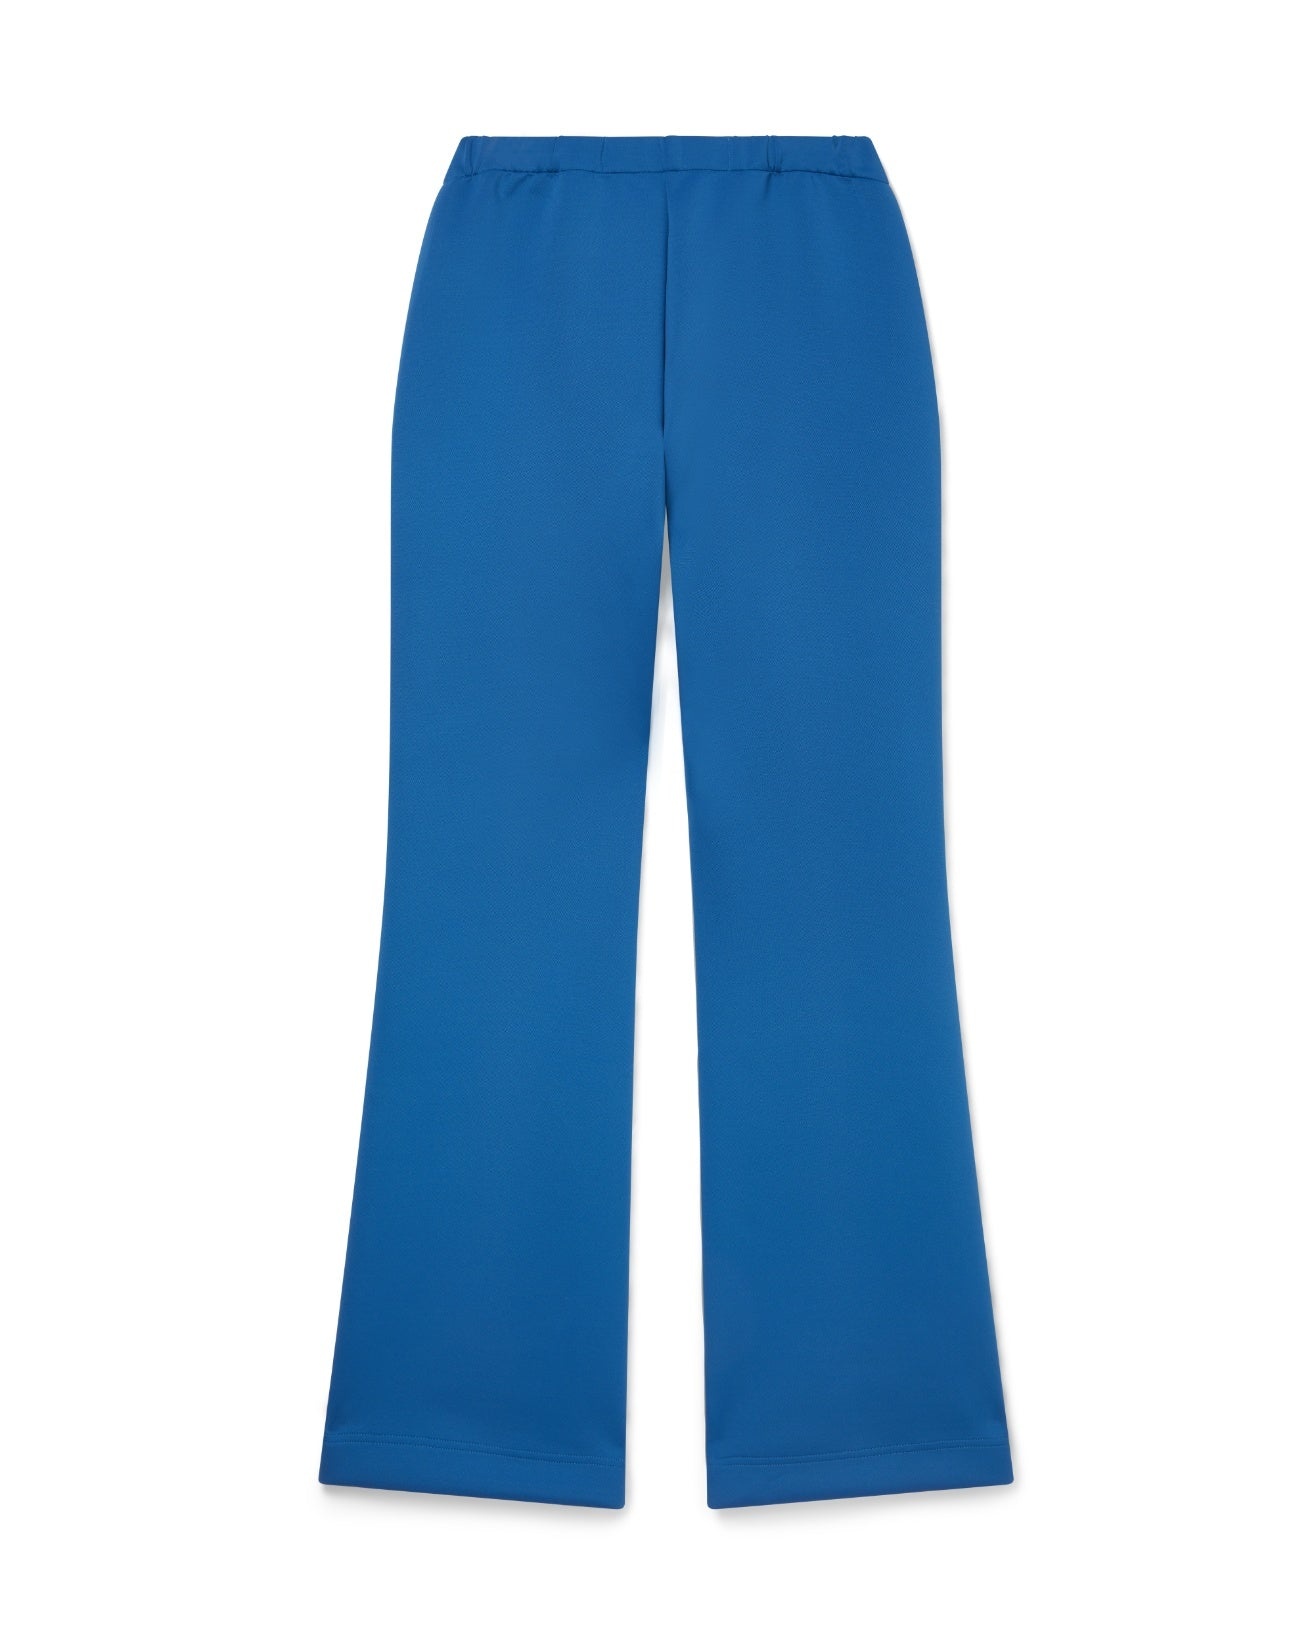 Blue Zip Tracksuit Trackpant - 2